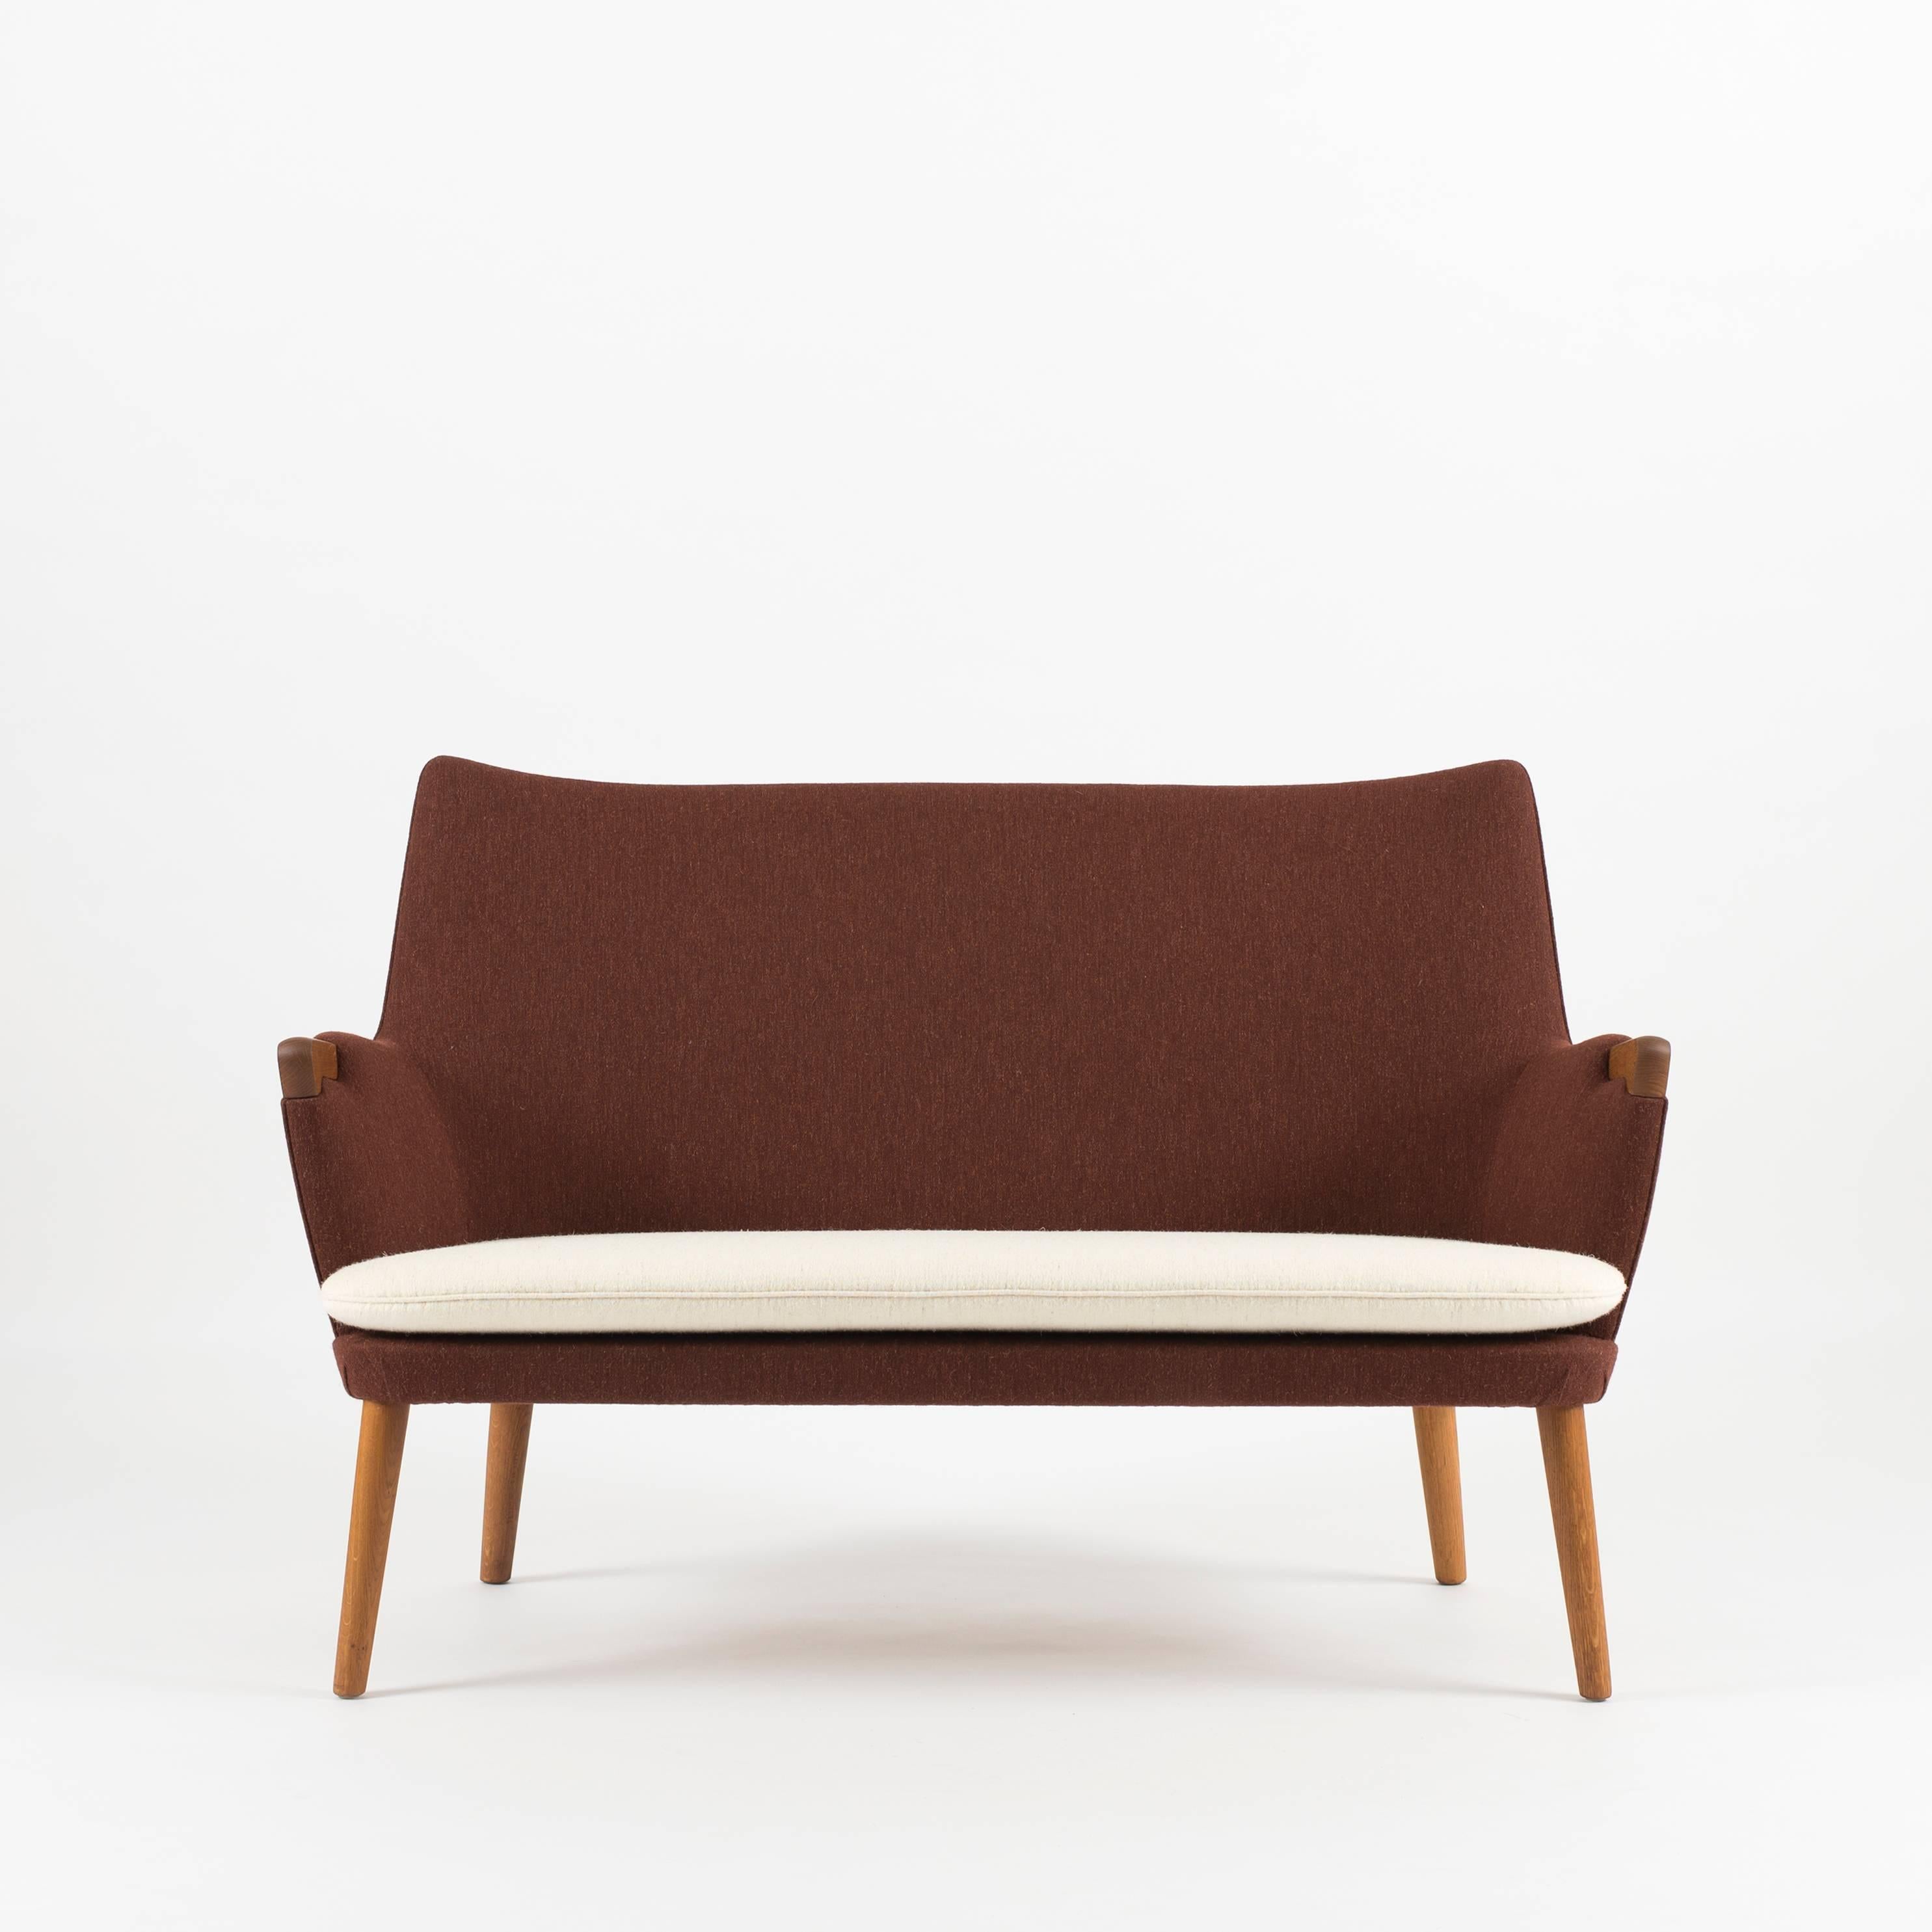 Hans J. Wegner two-seat sofa in oak and wool upholstery, model AP20. Executed by AP Stolen, Denmark.
   